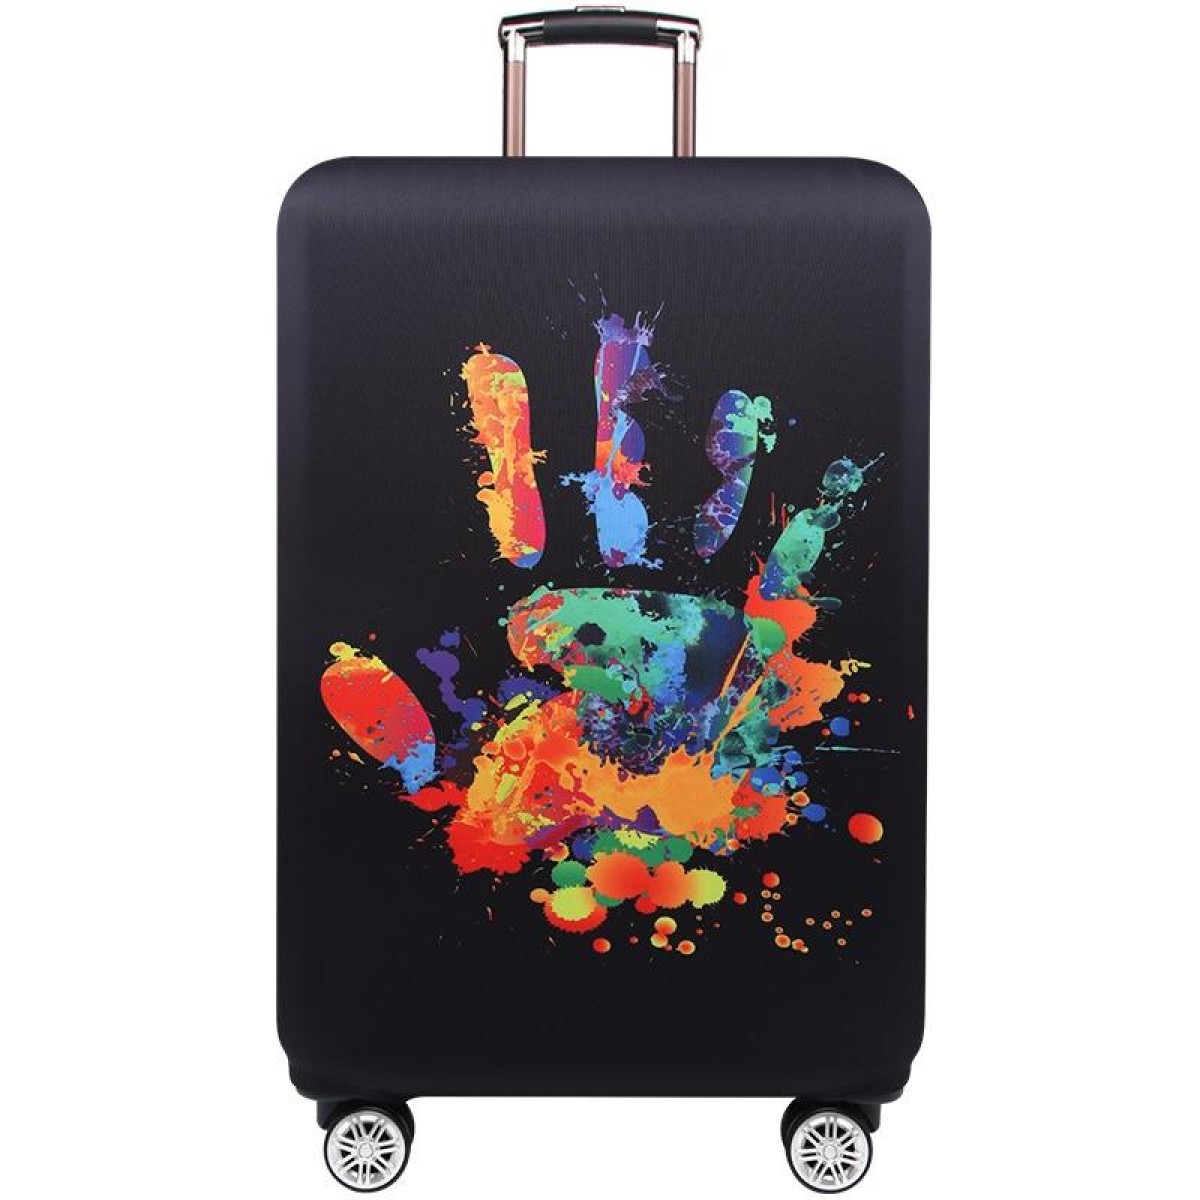 Luggage Thickening Wear-resistant Elastic Anti-dust Protection Cover, Size: S(Colorful Handprints)